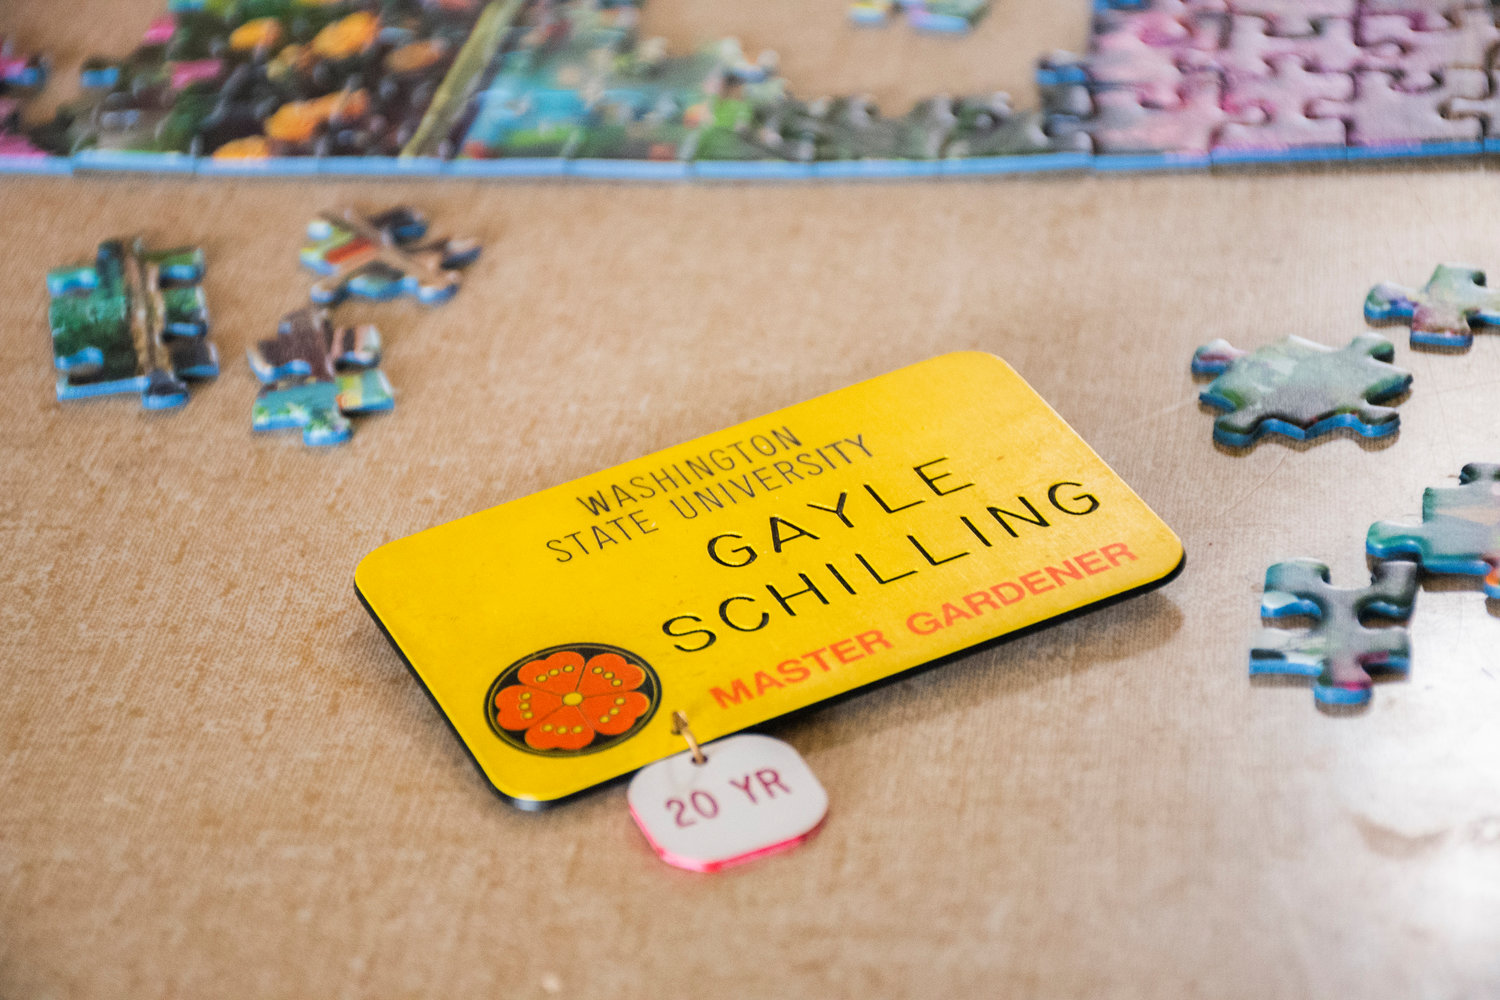 Gayle Schilling’s nametag sits on a table next to an unfinished puzzle of a garden Tuesday at her residence.